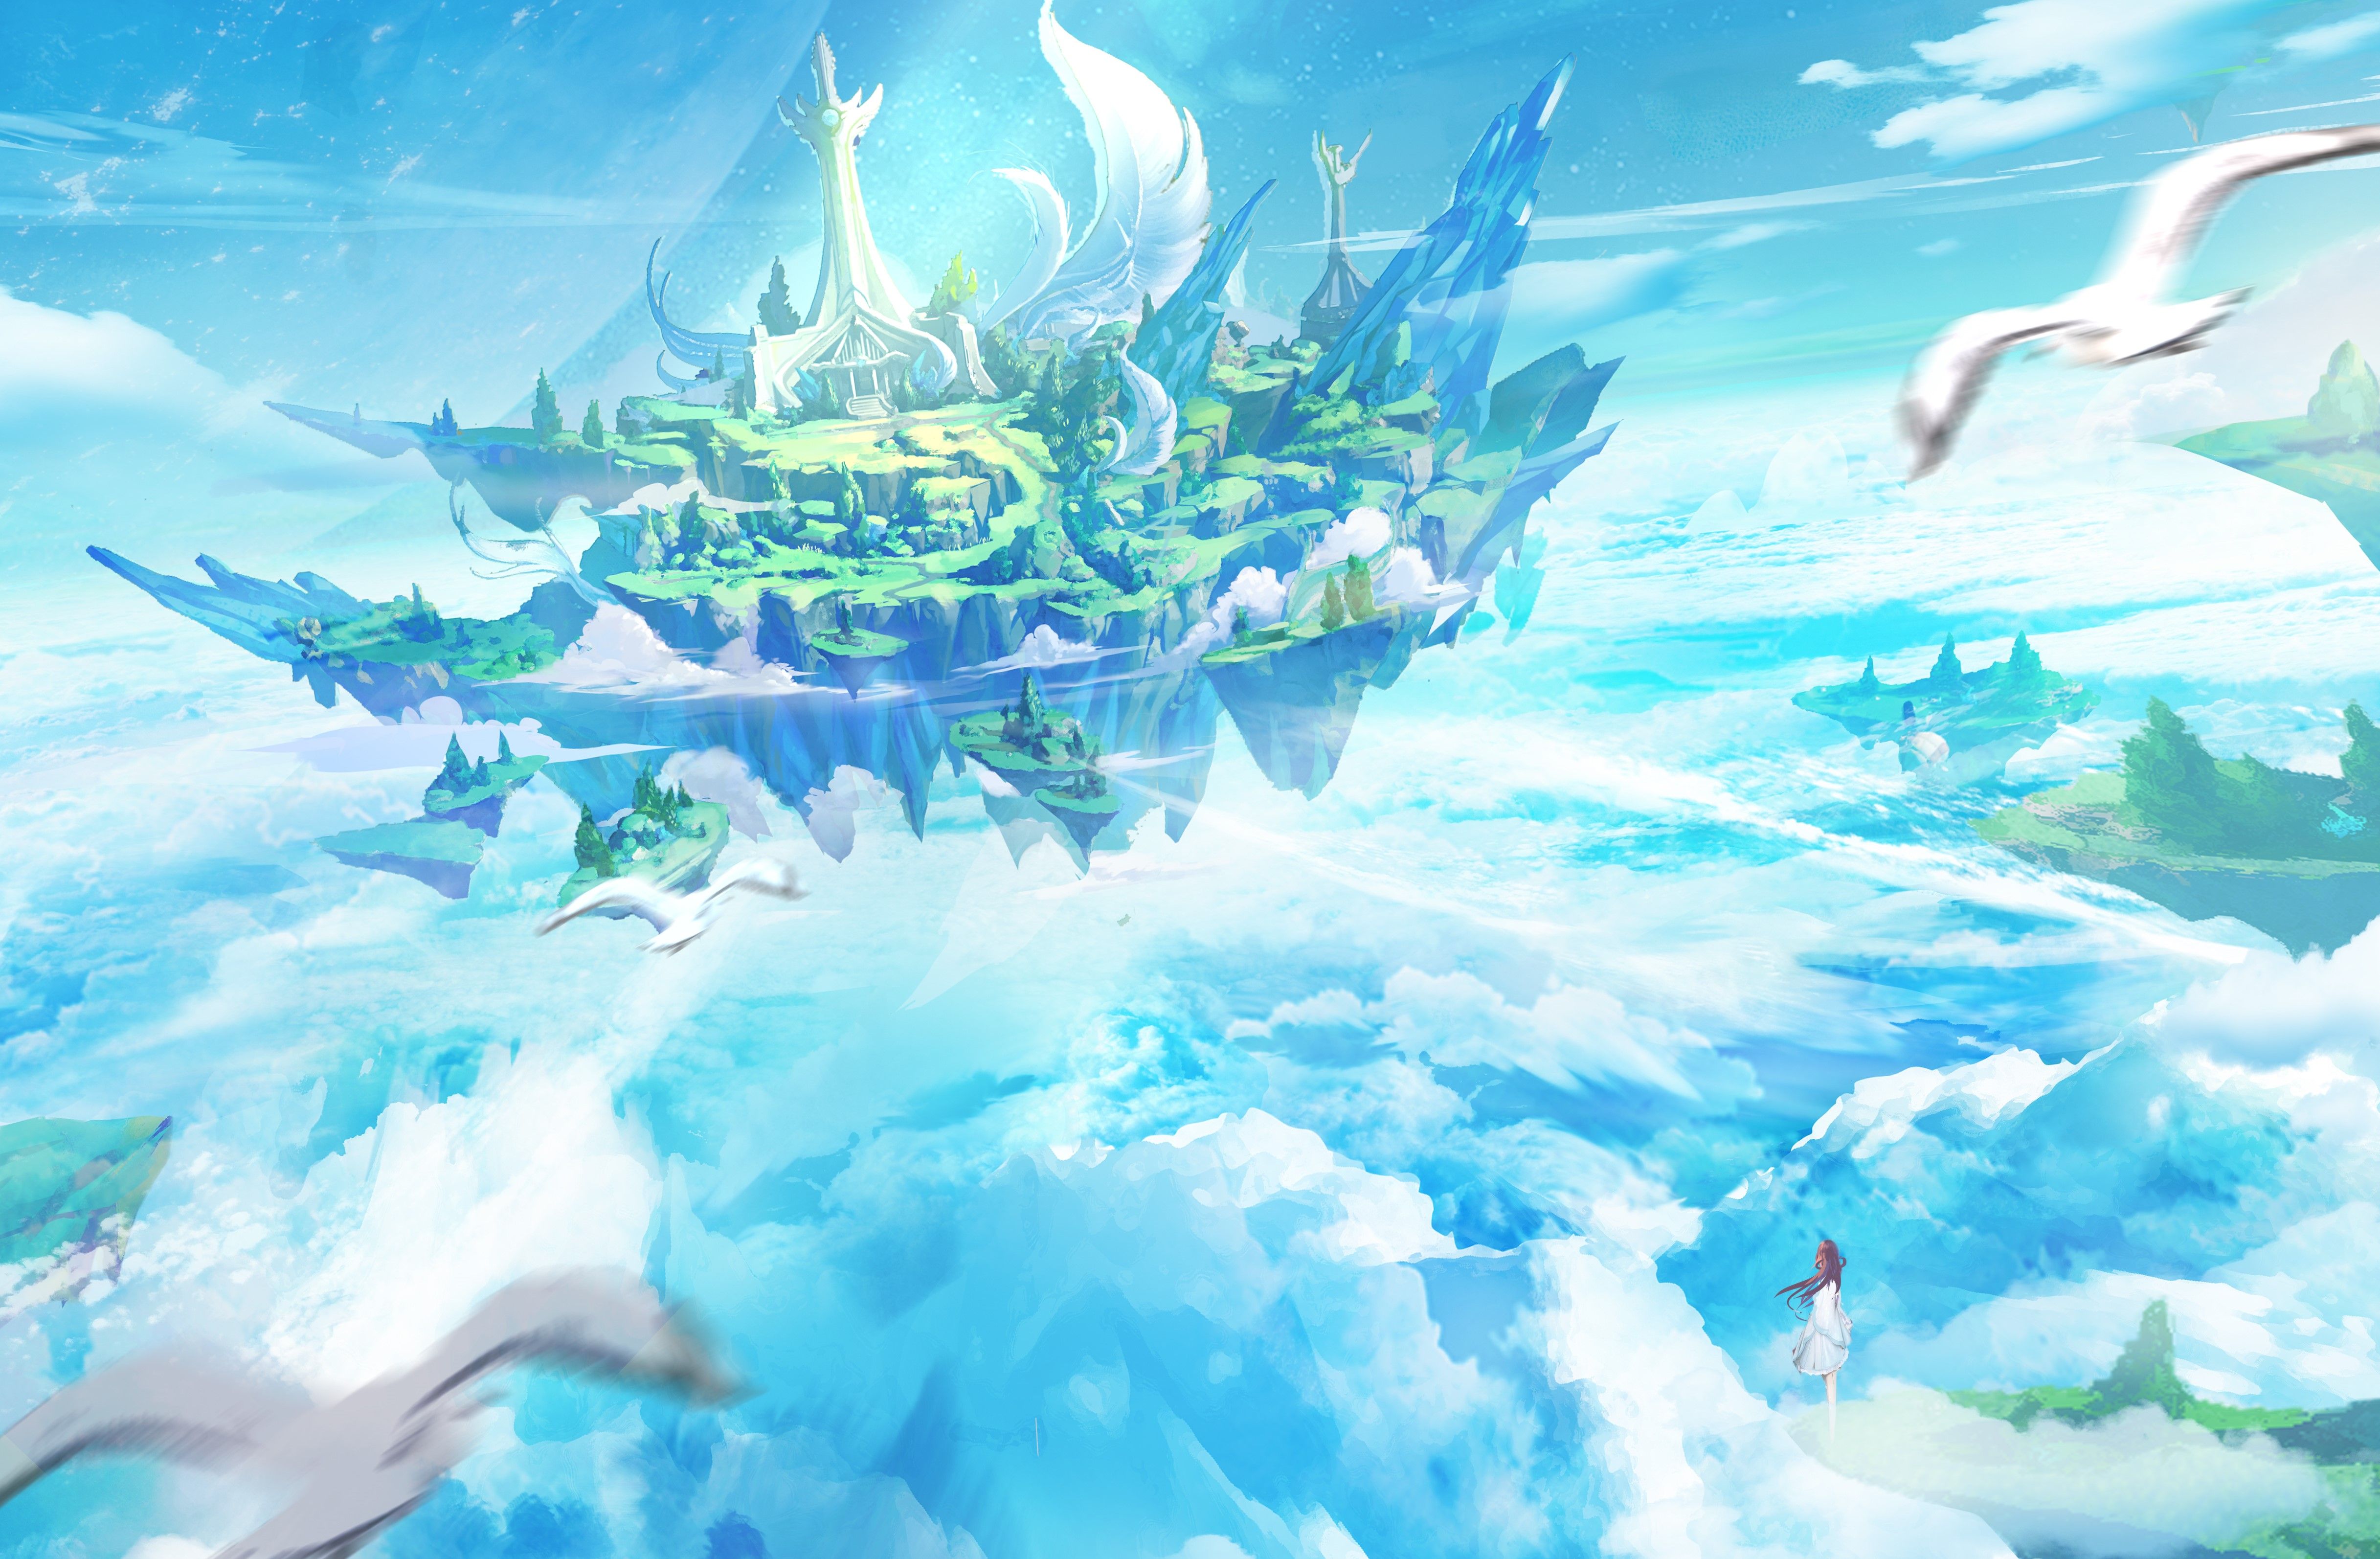 A painting of an island in the sky - Blue anime